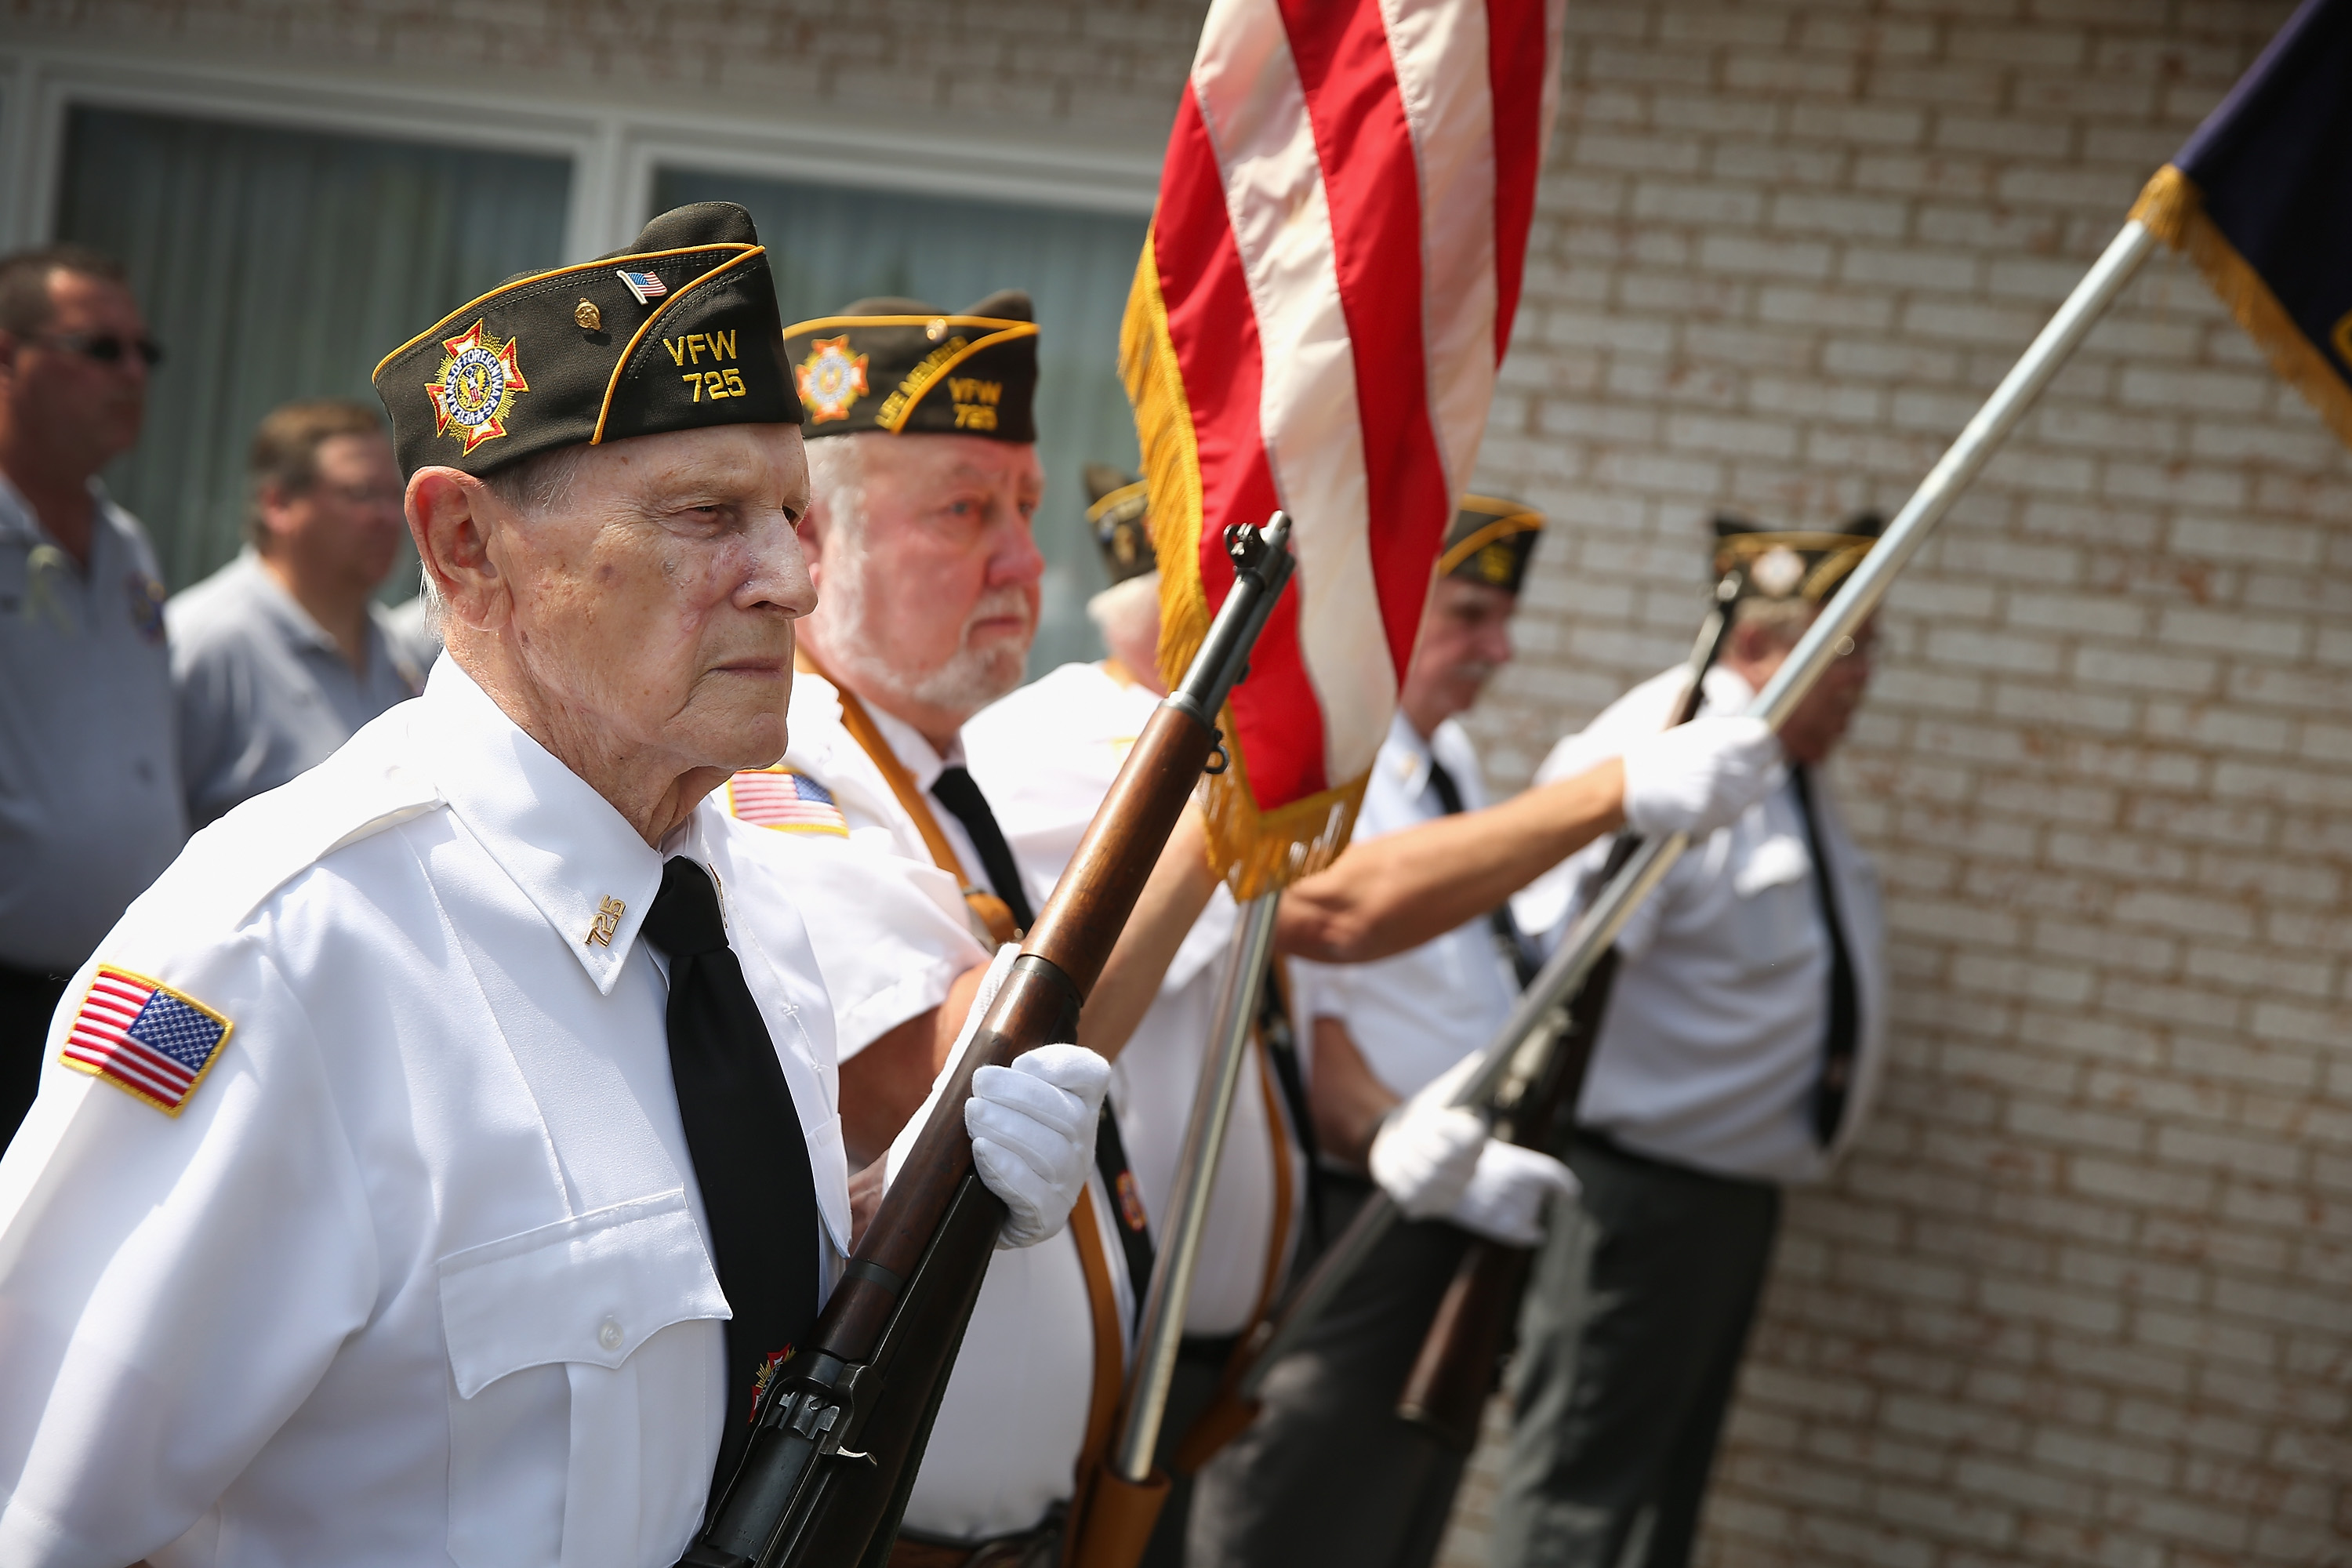 A VFW honor guard stands at attention as the remains of Army Pfc. Aaron Toppen are carried into the funeral home on June 21, 2014 in Mokena, Ill.